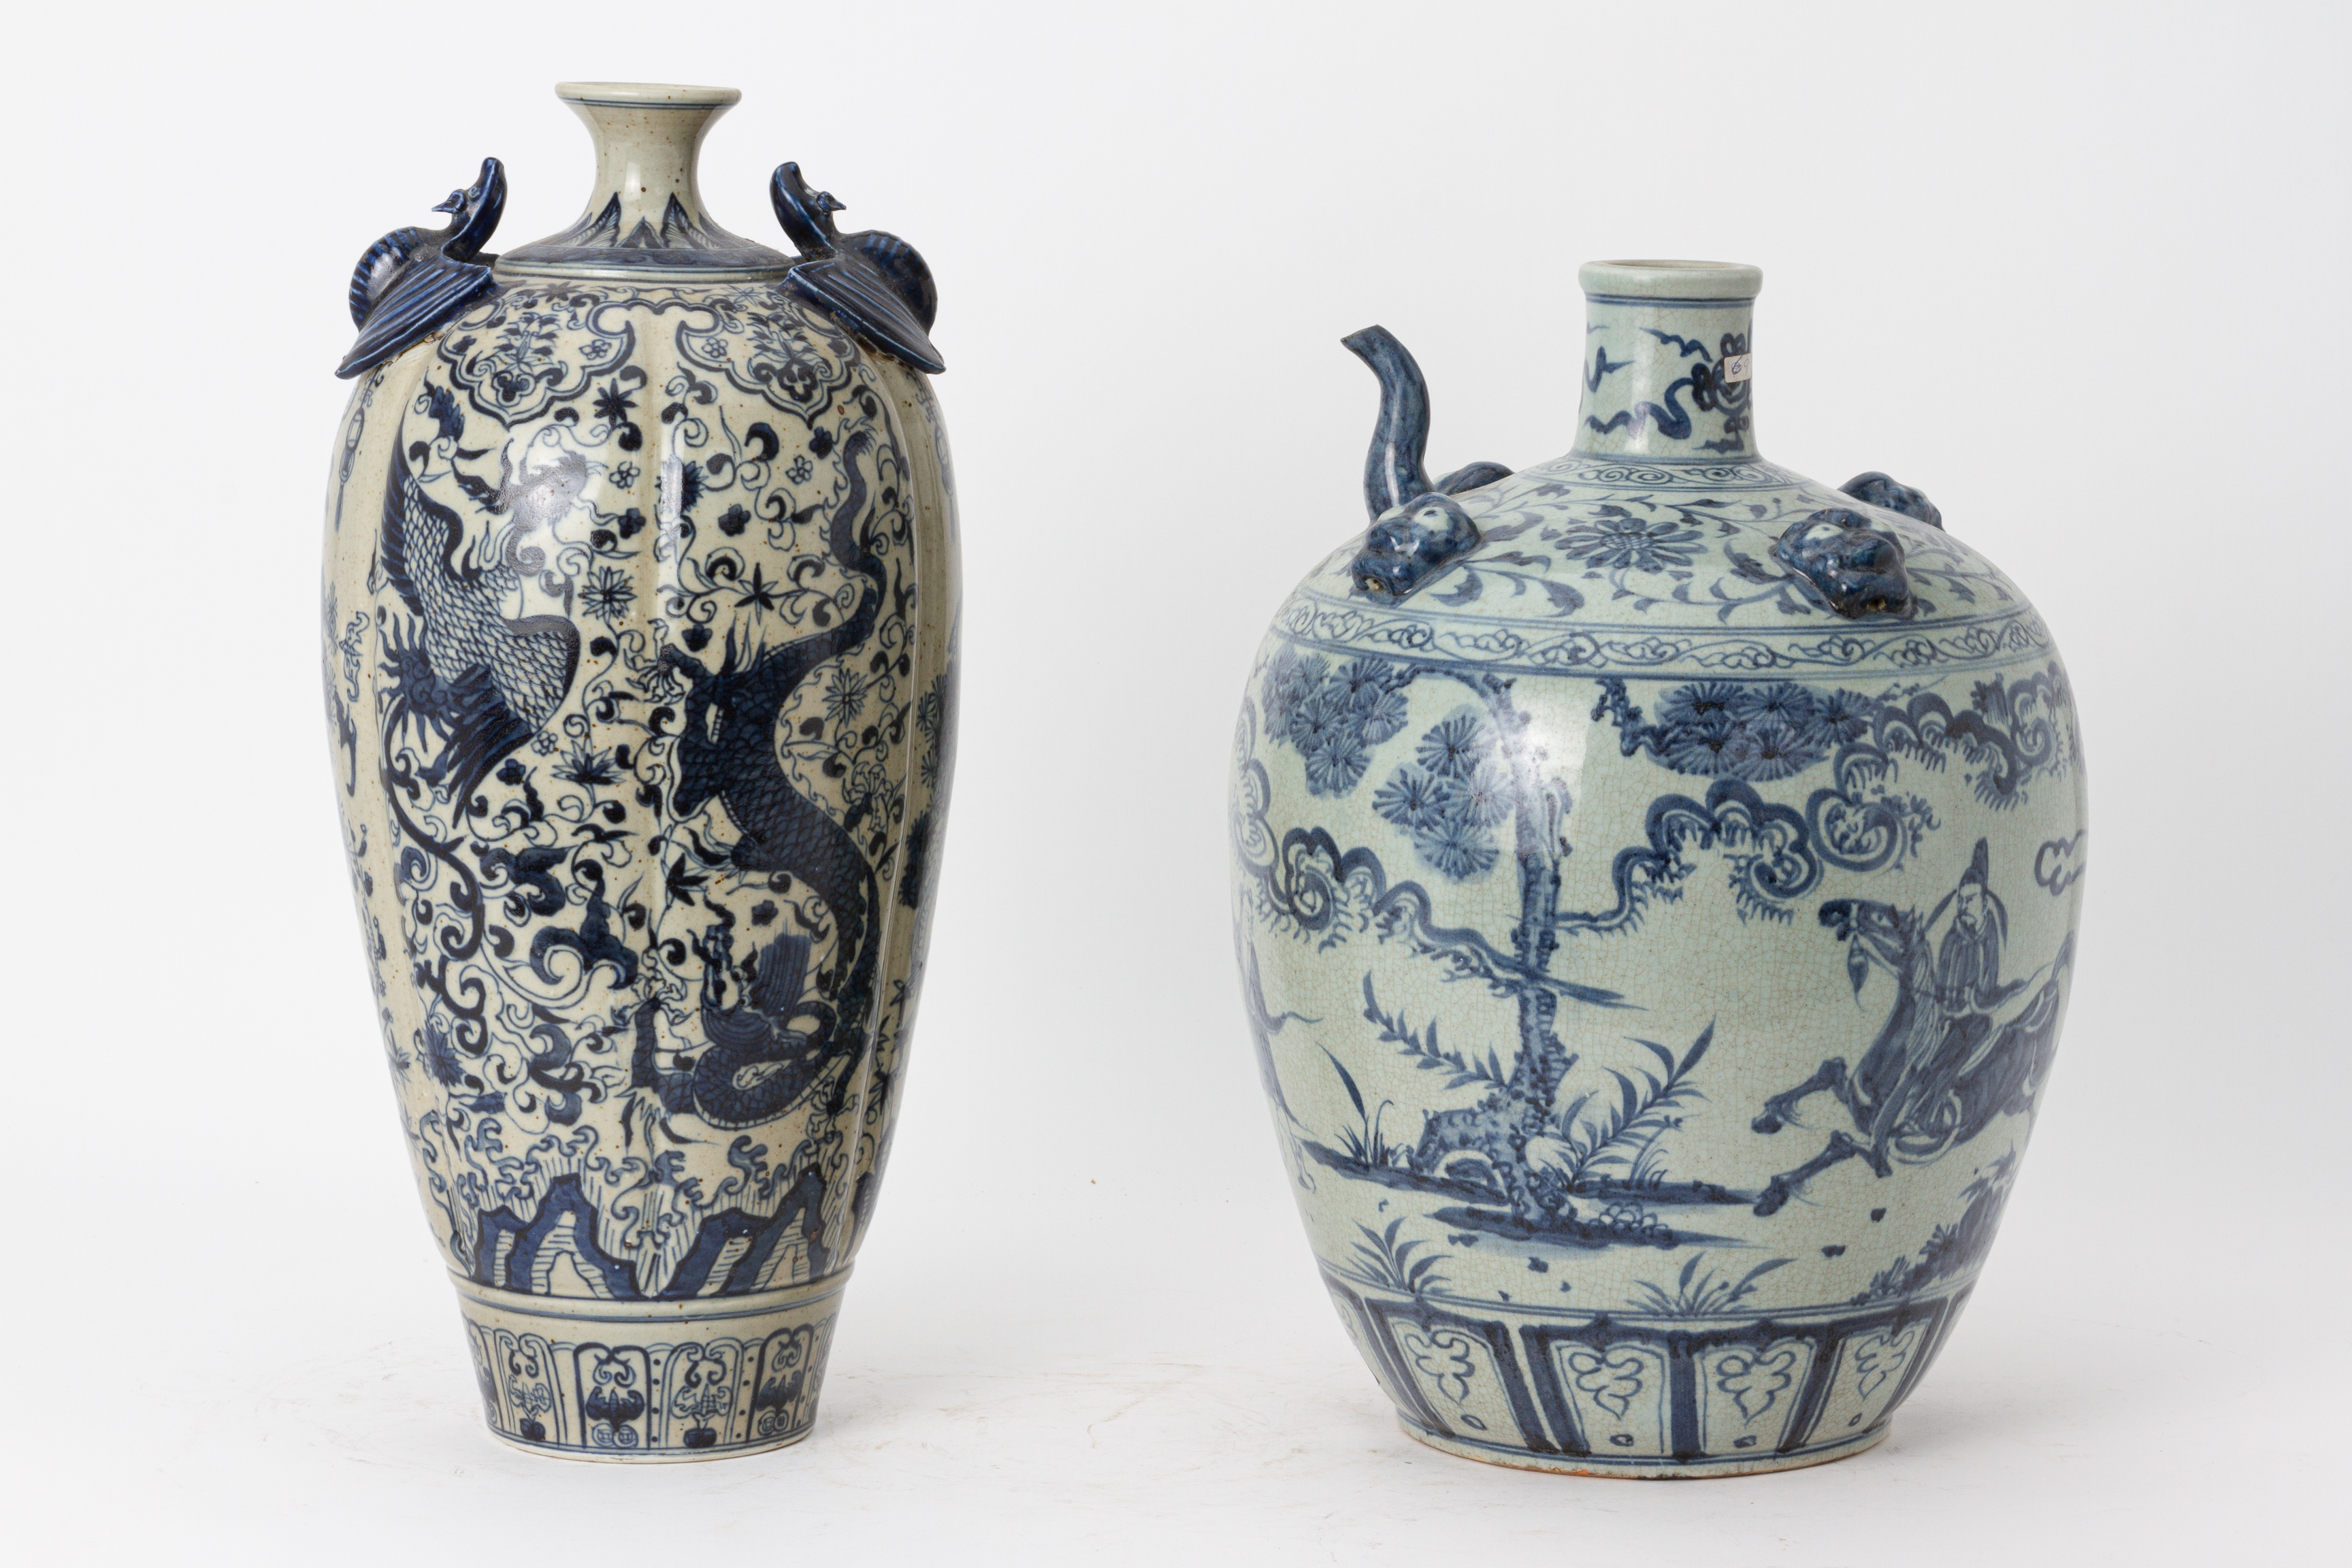 A LARGE BLUE AND WHITE VESSEL AND A FLUTED VASE - Image 3 of 3